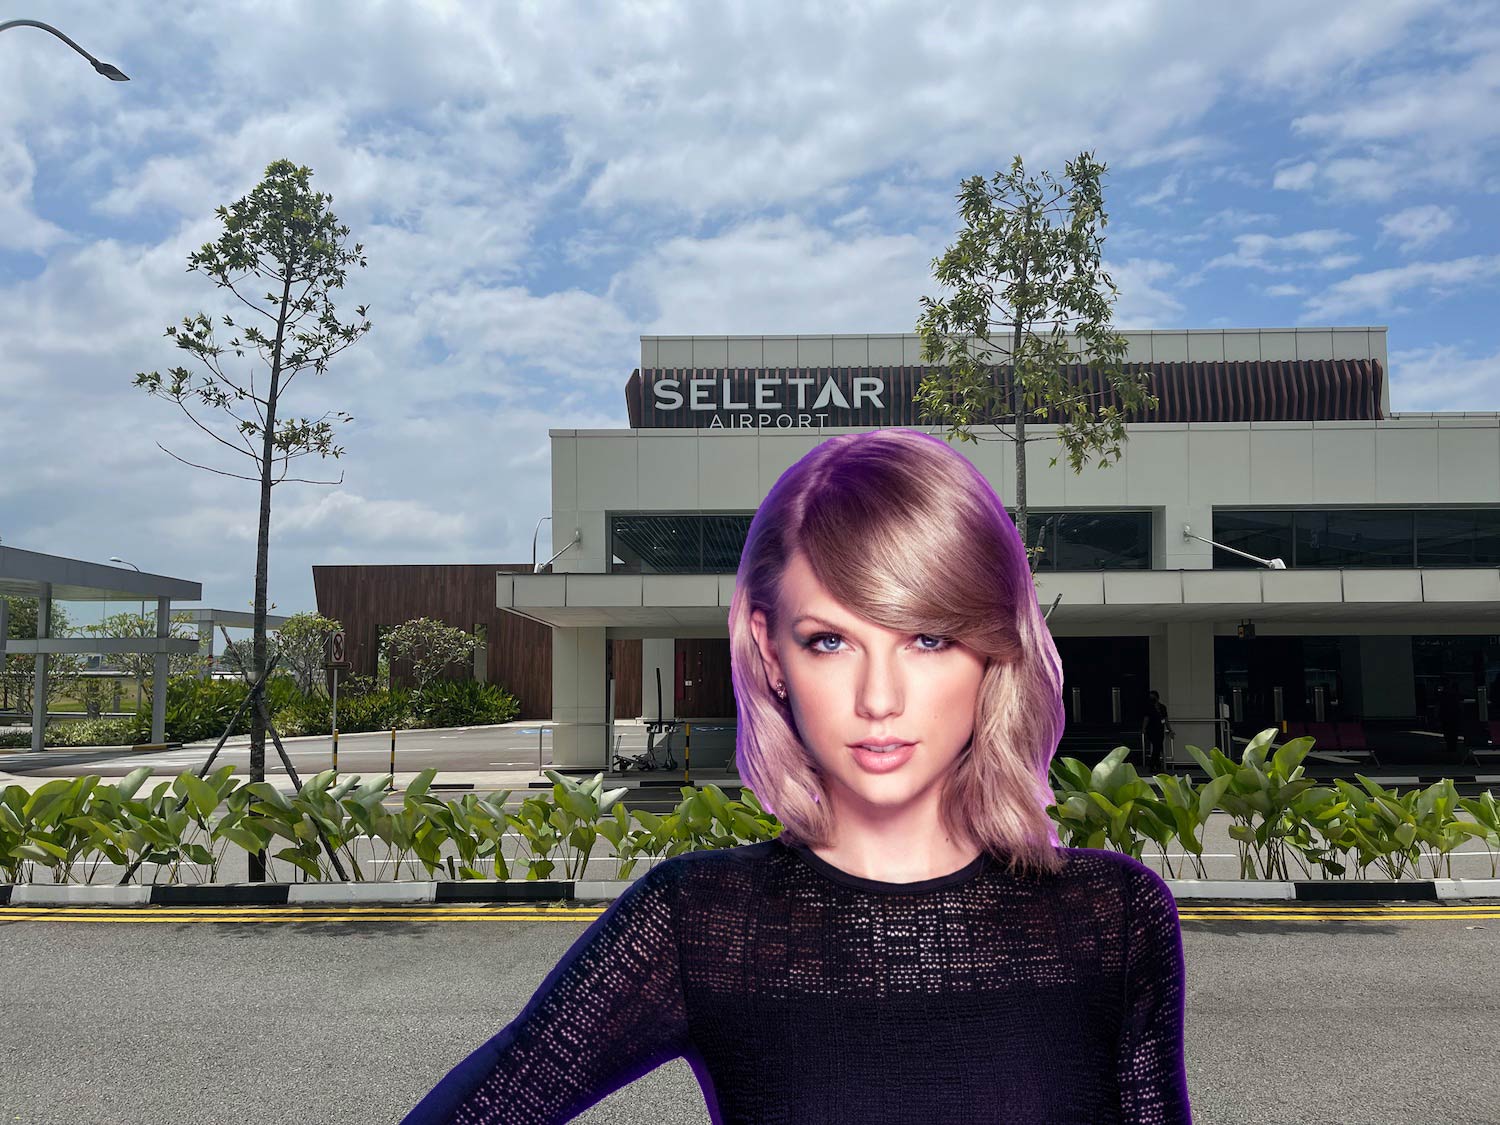 Taylor Swift Lands At Seletar Airport: An Inside Look At Singapore's VIP Airport - Live and Let's Fly